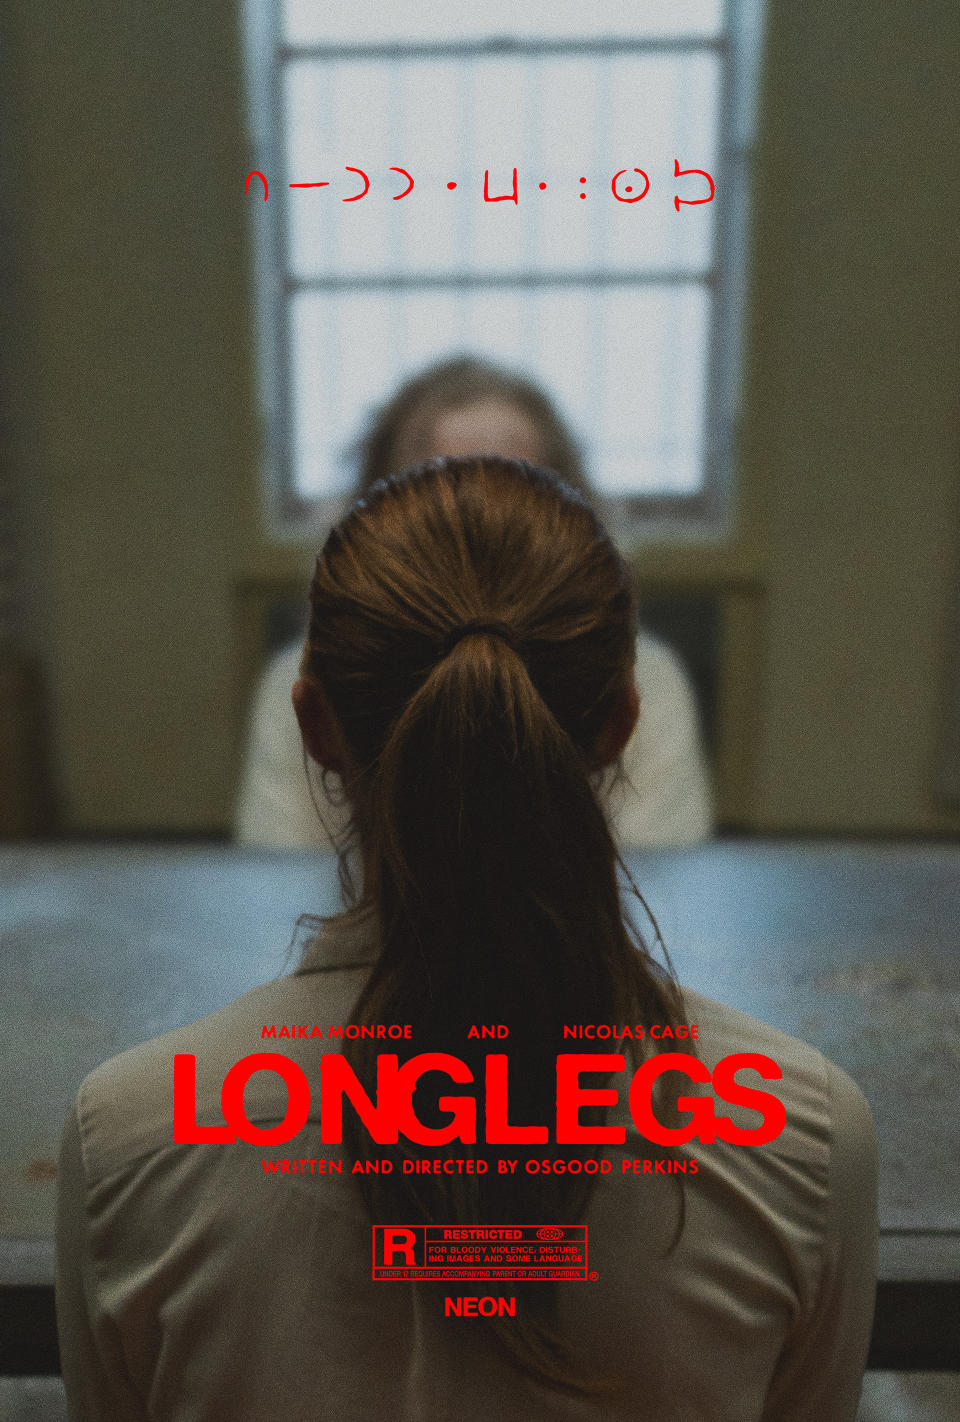 Person facing away, sitting across another blurred figure, movie poster for "Longlegs" with Maika Monroe and Nicolas Cage